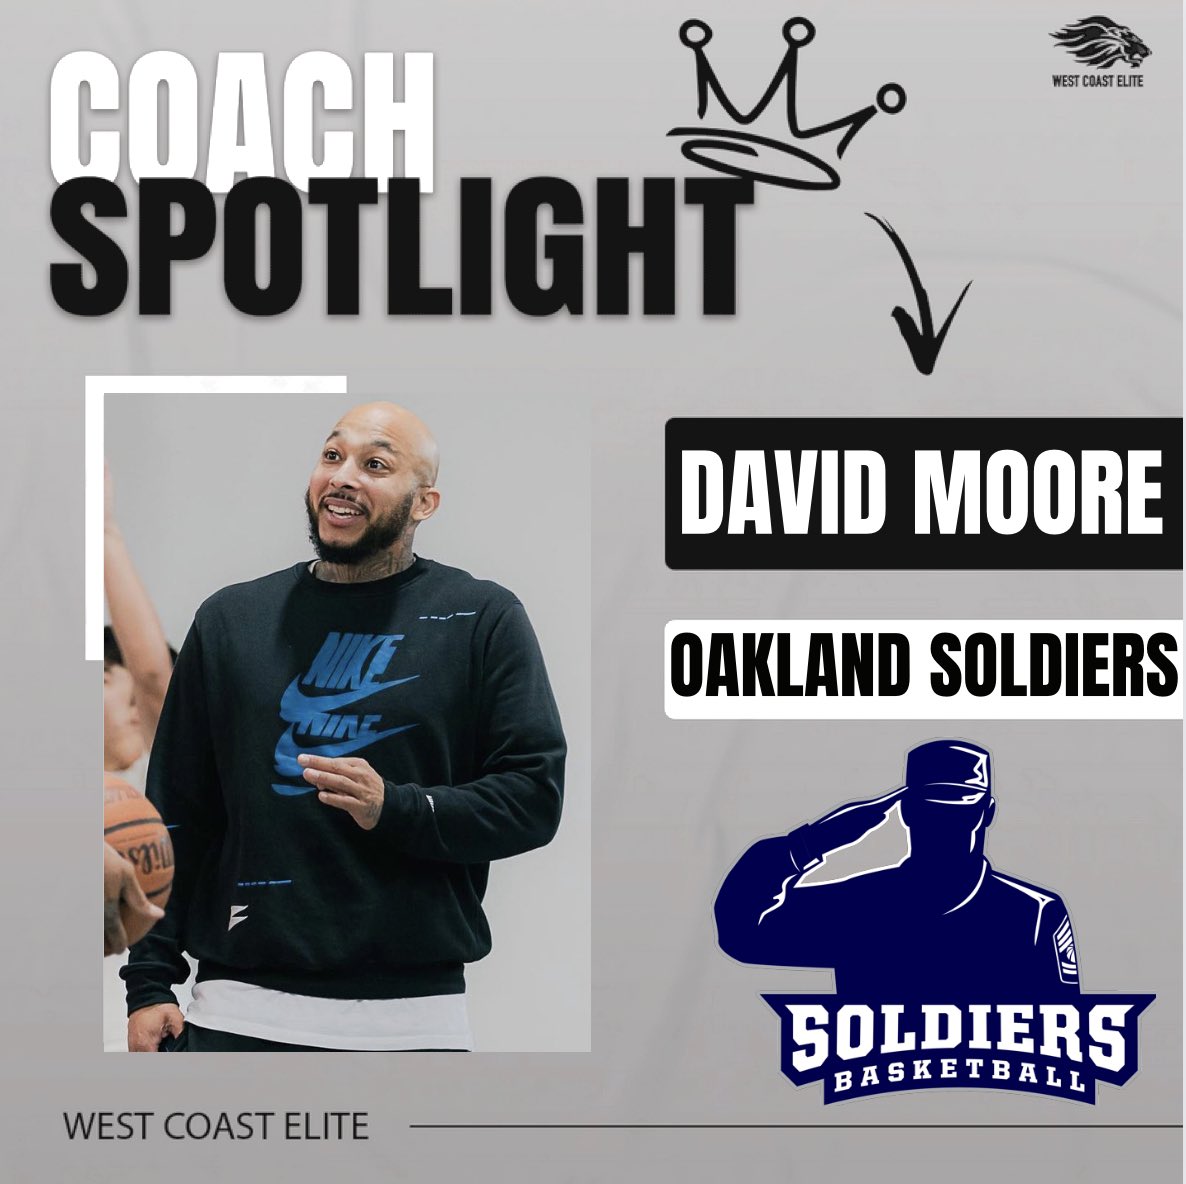 #CoachSpotlight

David Moore has been on the ground working in NorCal over the years. One of the best trainers in the region that is responsible for the development of some of today’s best players from the area. Much respect to Coach DMo

🏀🔥